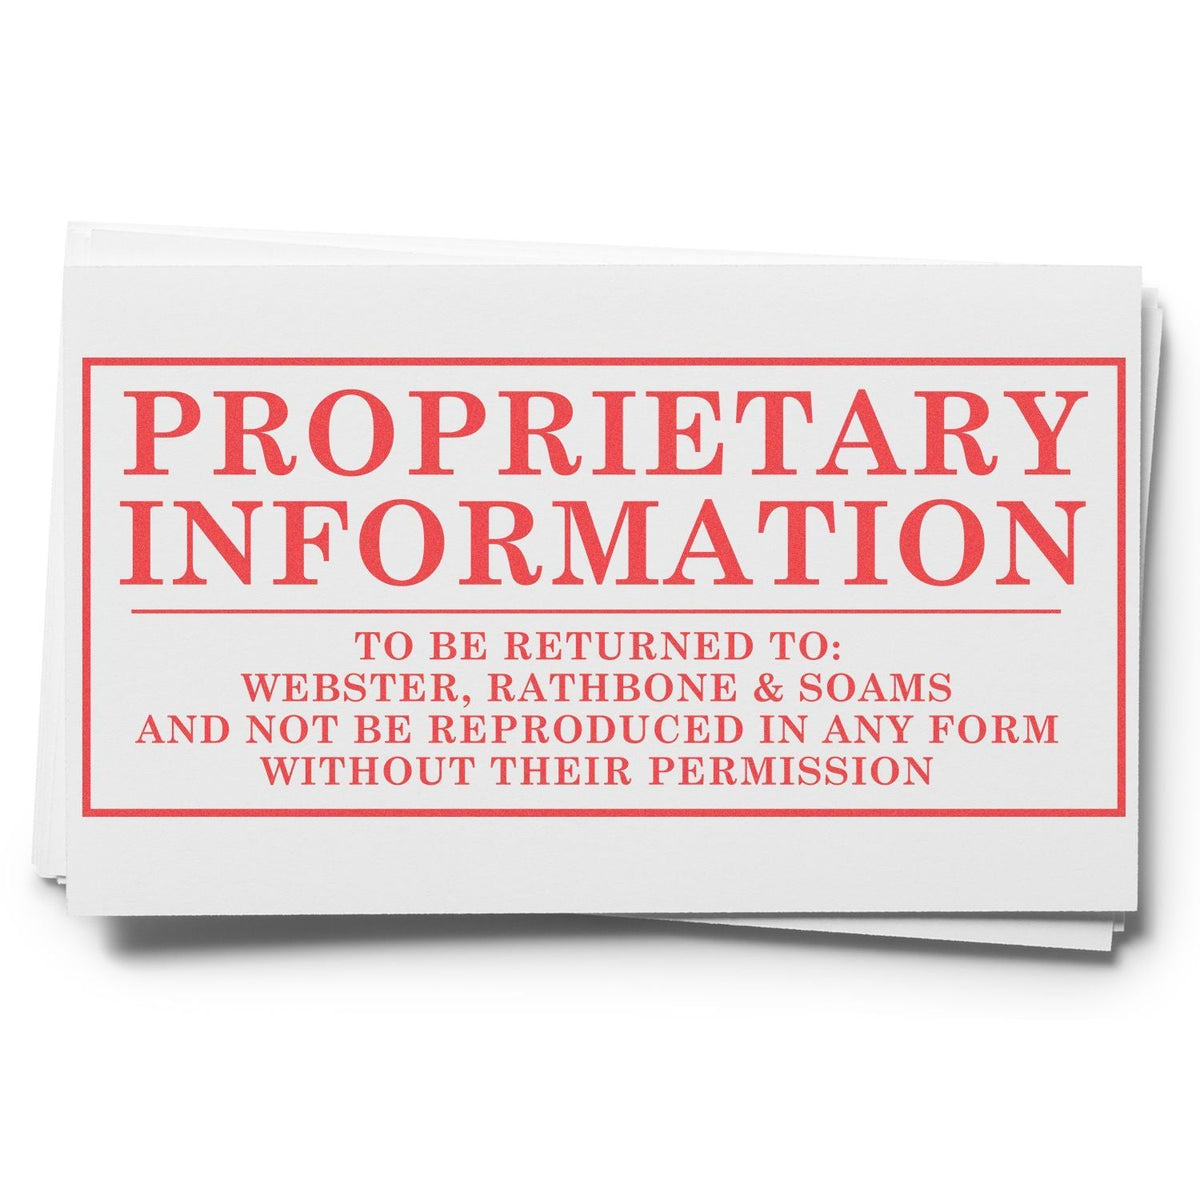 Proprietary Information Stamp Example